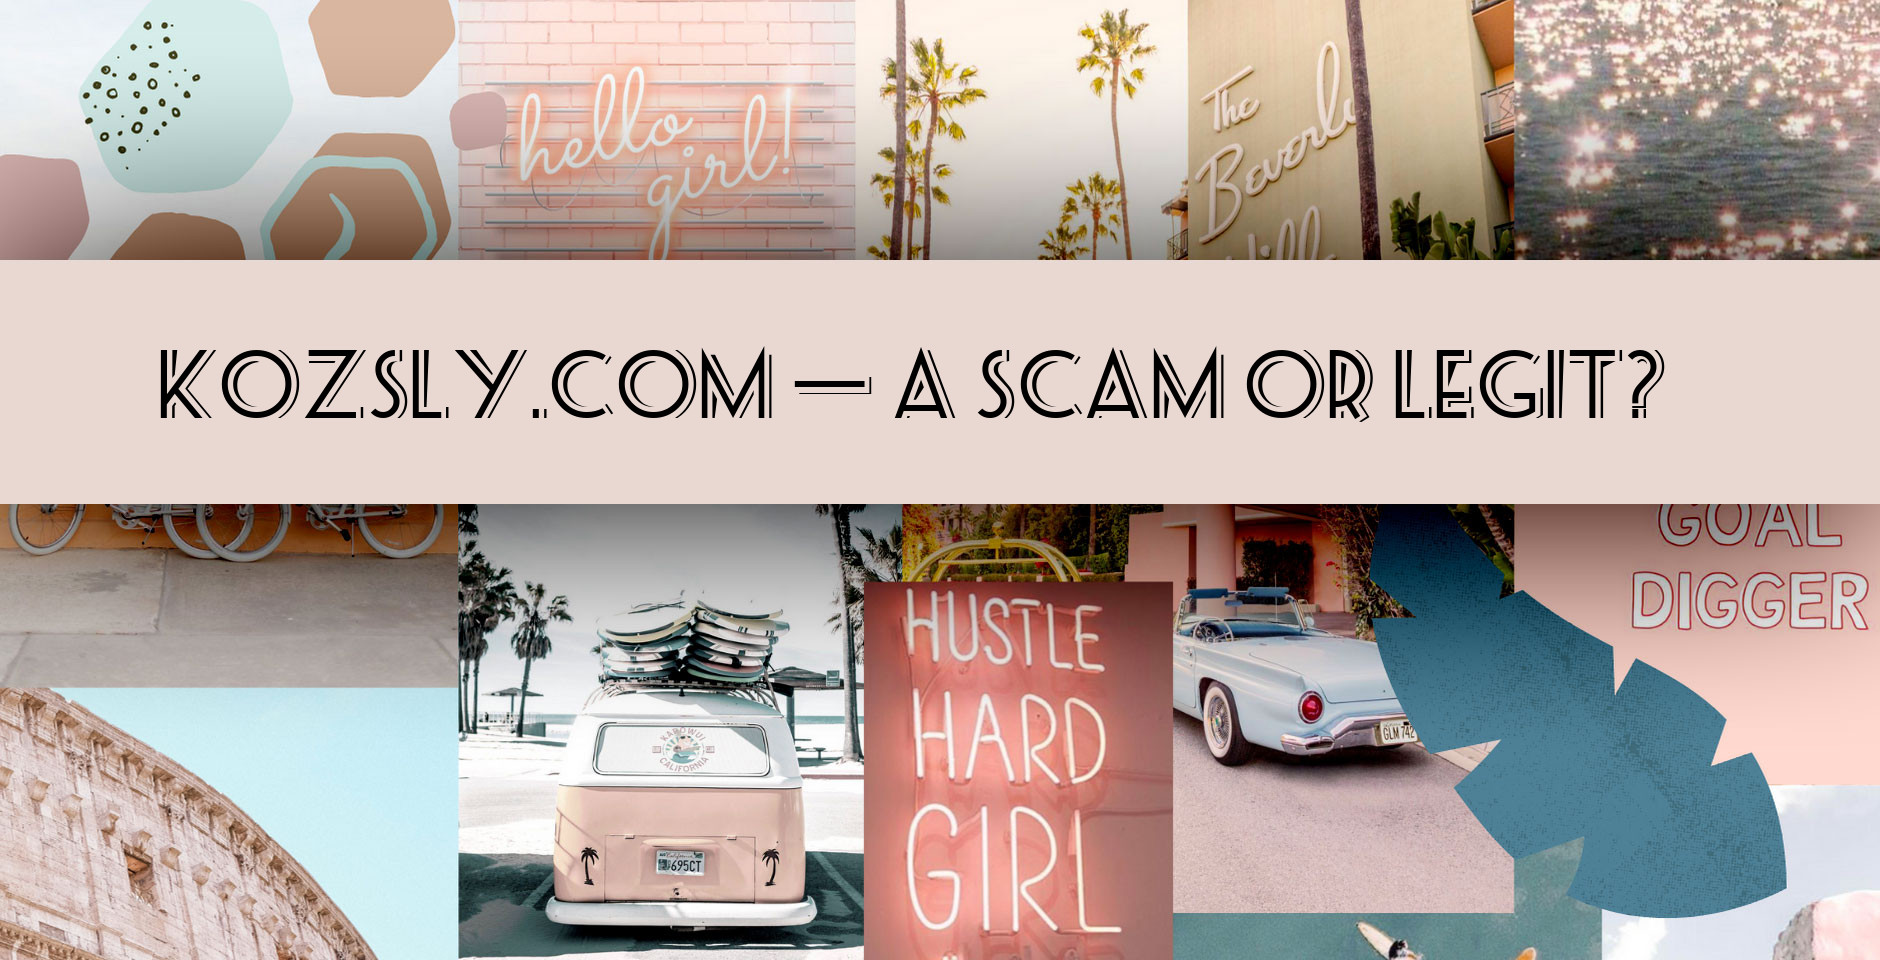 Cozy Breezy Reviews [ With Proof Scam or Legit ? ] CozyBreezy ! CozyBreezy  Com Reviews 